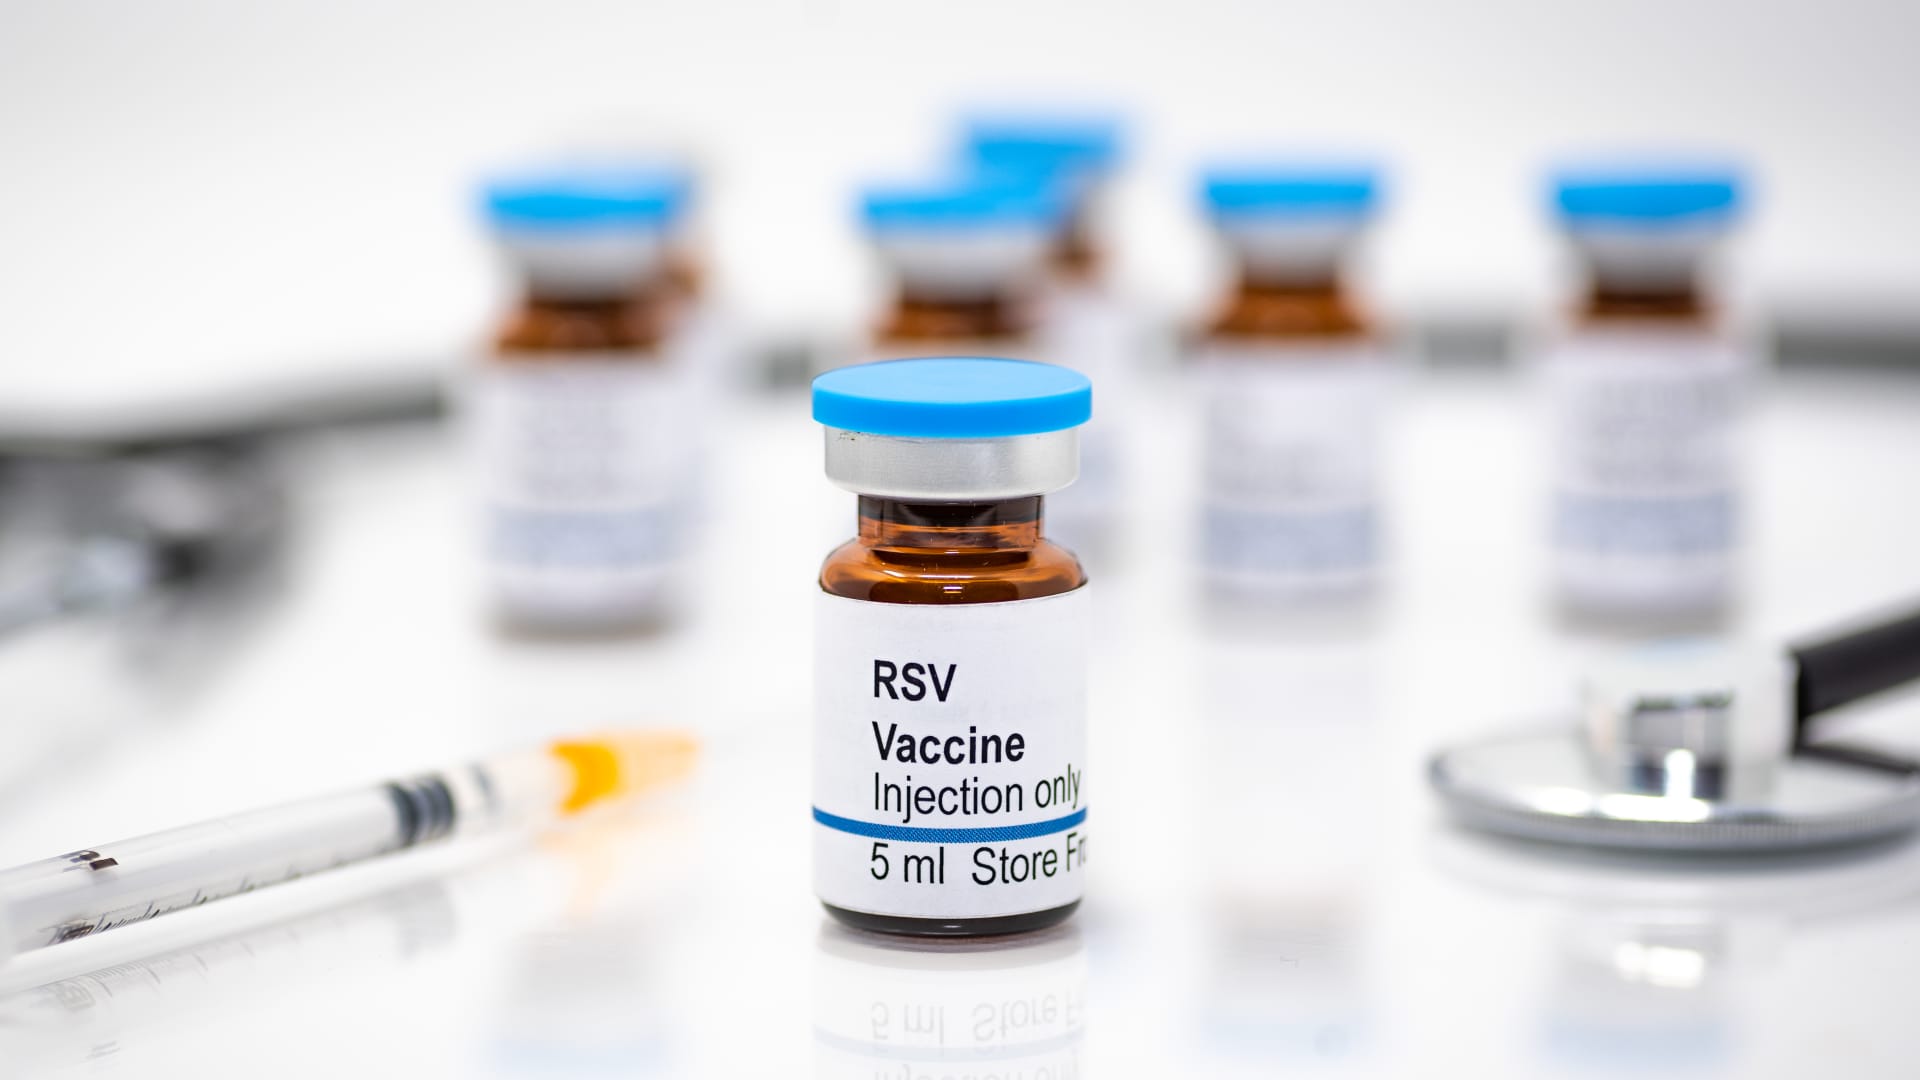 CDC recommends RSV vaccines from Pfizer, GSK for adults 60 and older